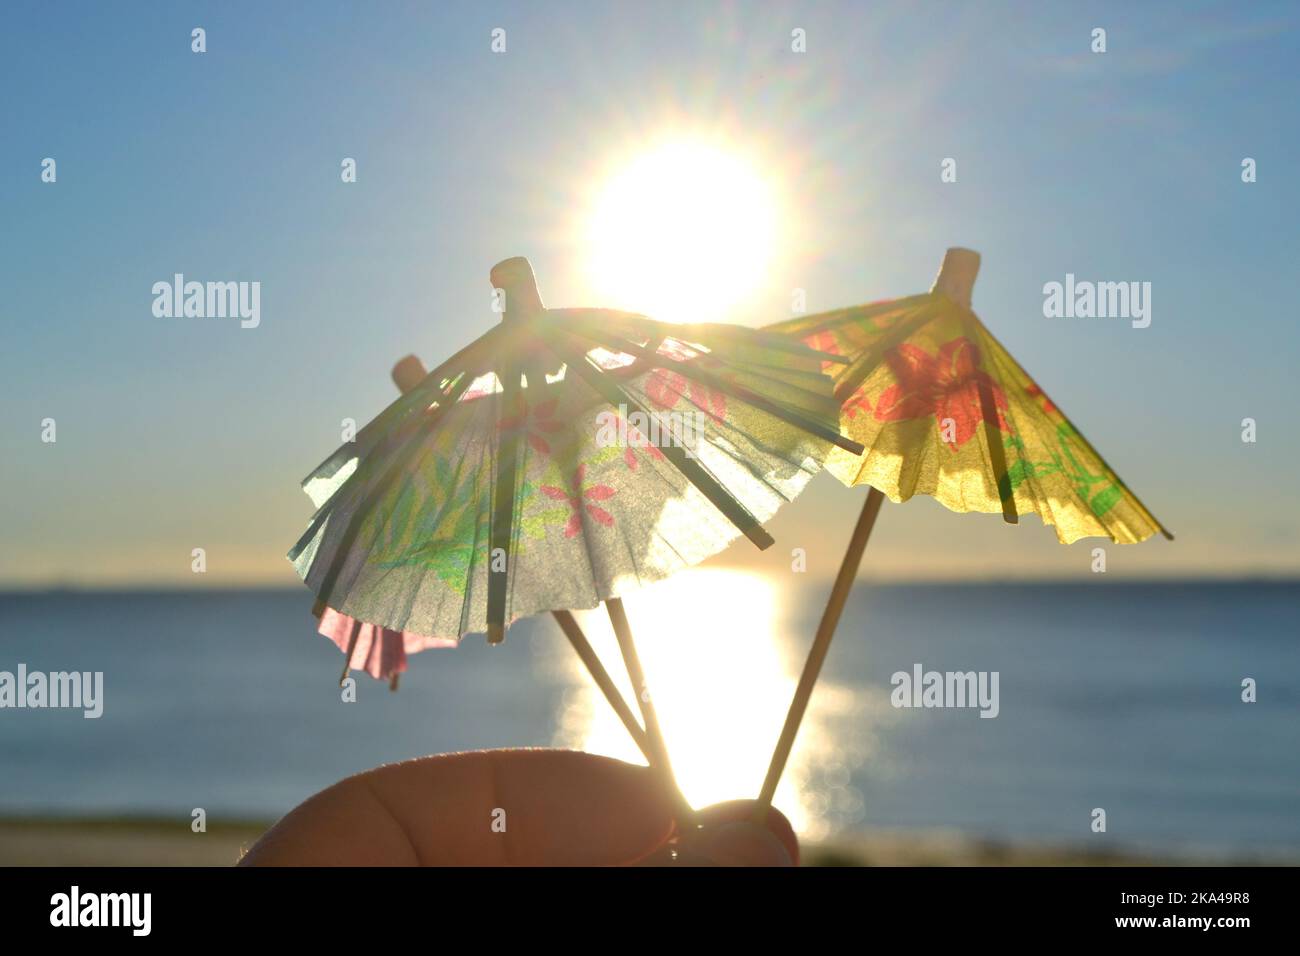 Man holding in hand three paper umbrellas cocktail decorations on background of blue sky, brightly shining sun and sunny path on surface of blue sea. Concept of summer, sea, vacation, travel, tourism Stock Photo